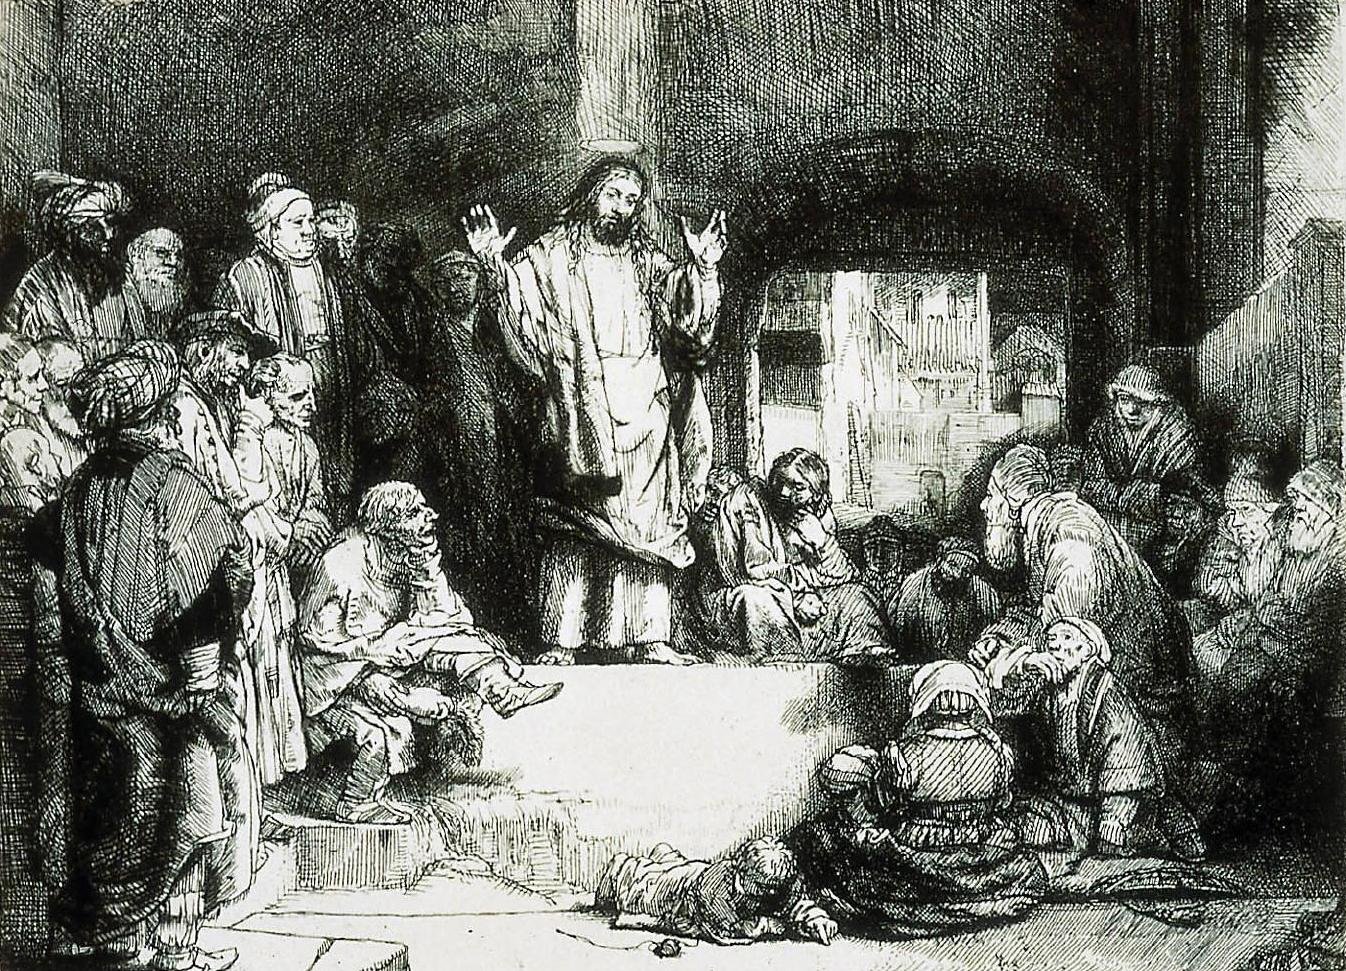 Christ Preaching (1652), by Rembrandt.